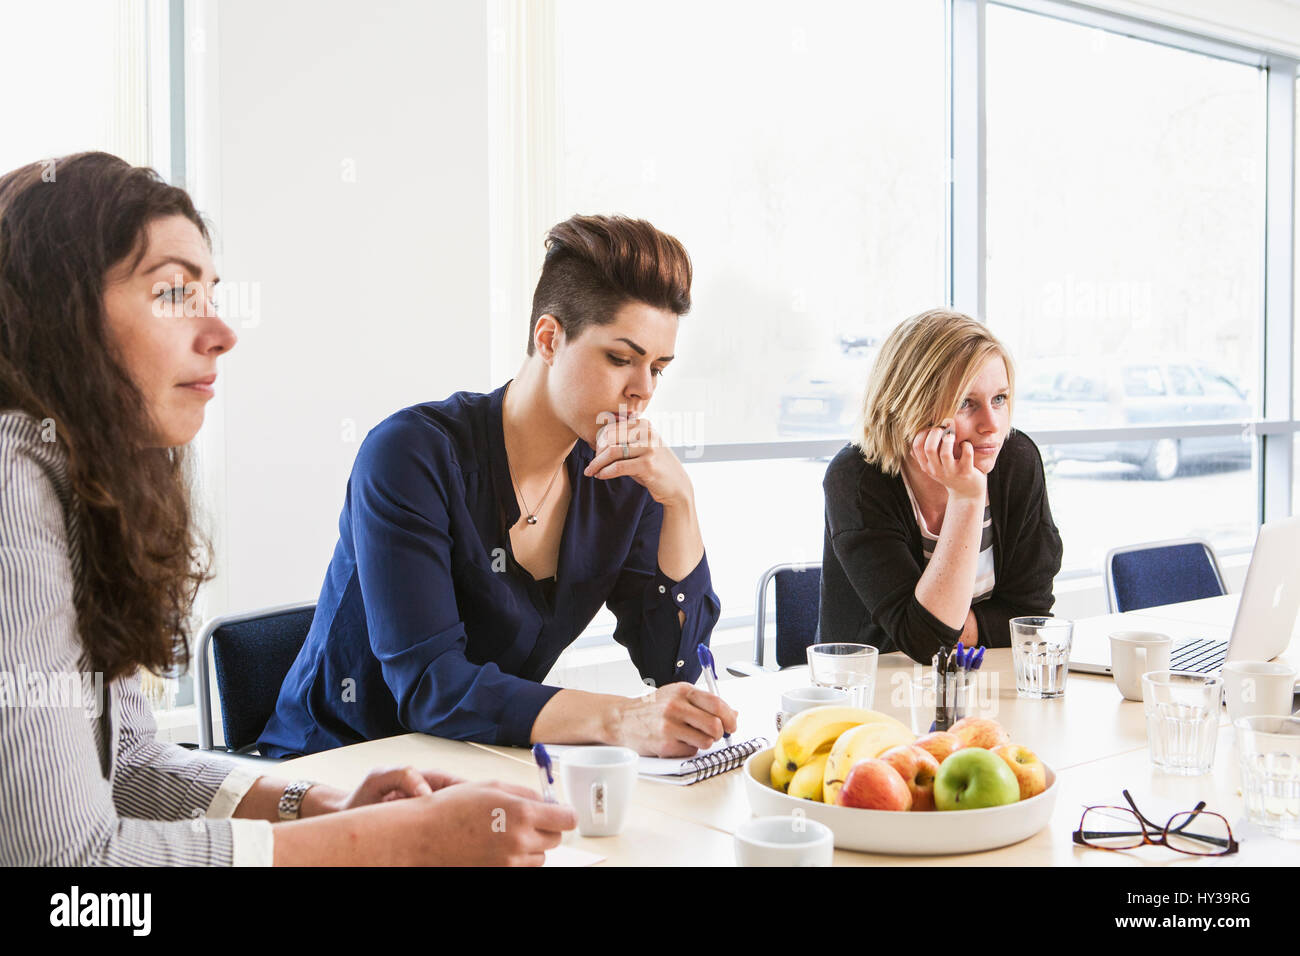 Sweden, Women concentrating on discussion Stock Photo